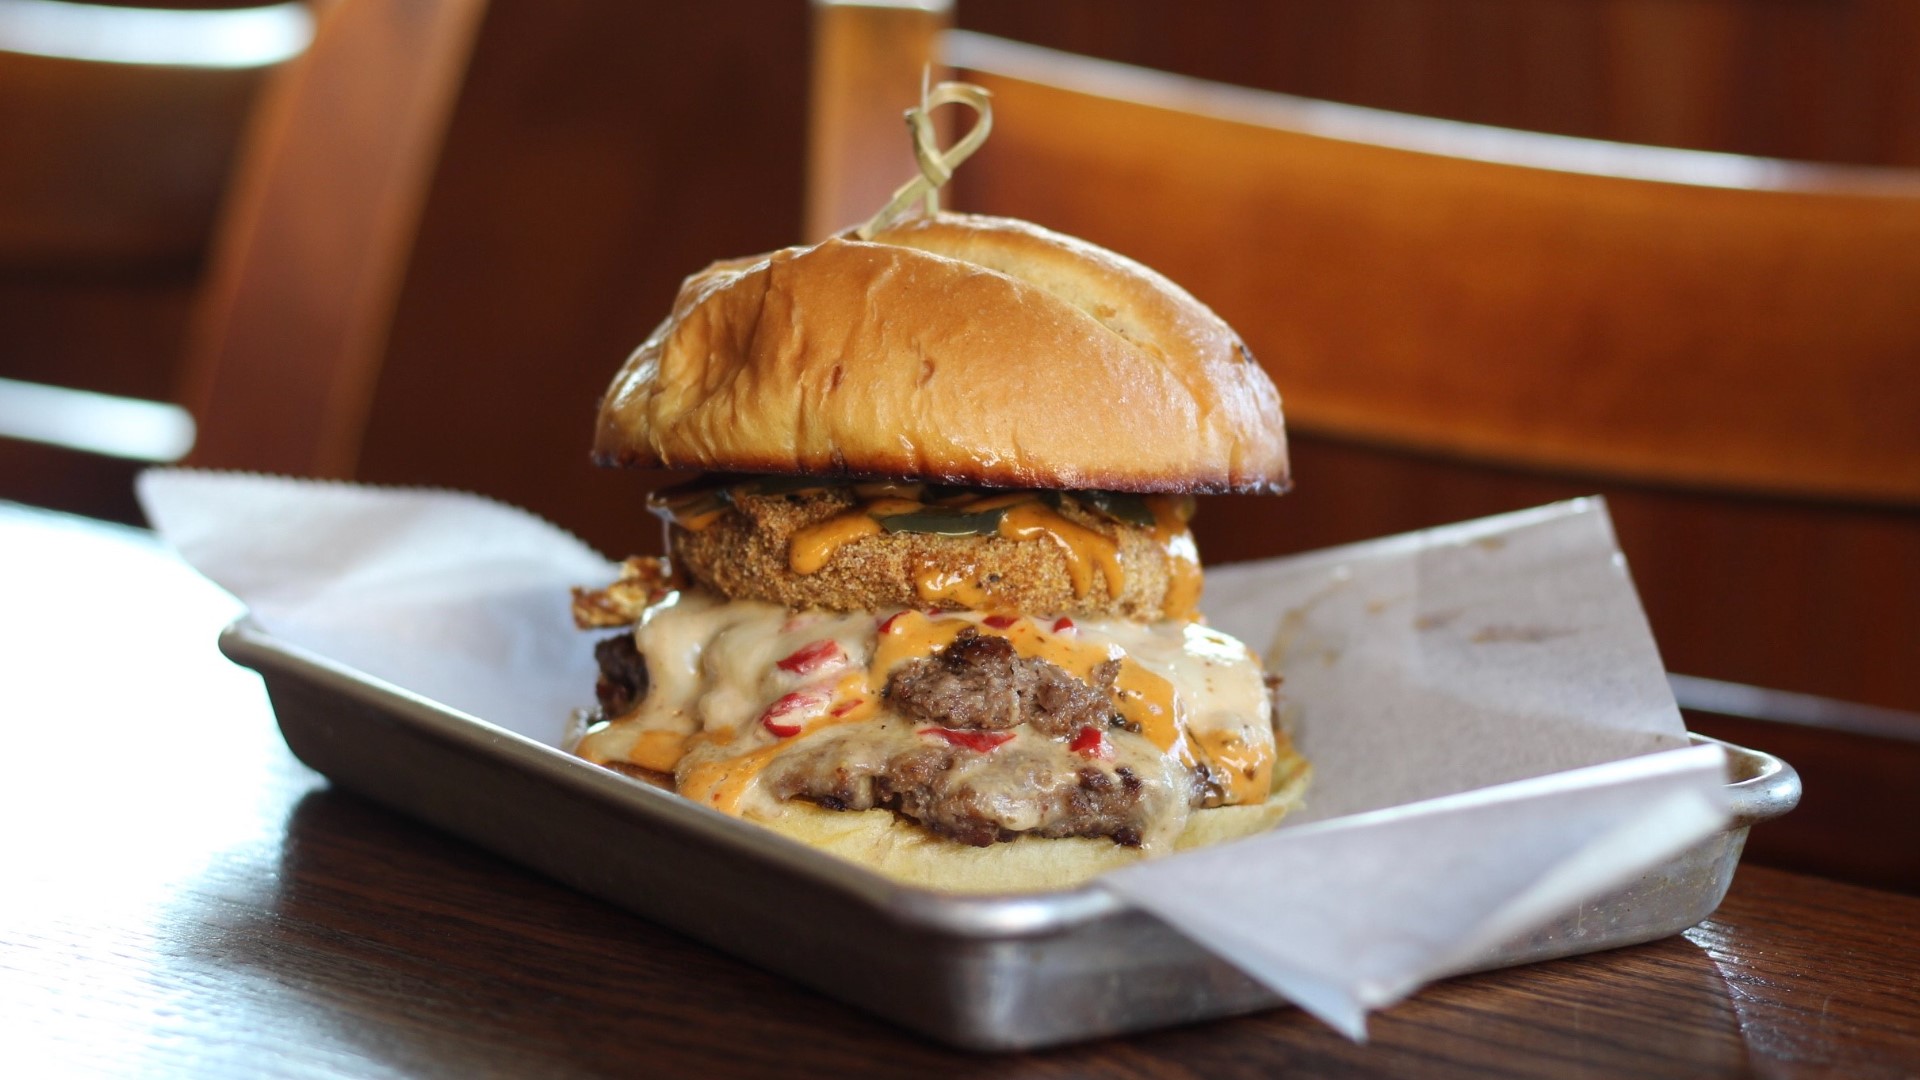 Over 40 locations, including the most mouthwatering hot spots, are featuring $6 burgers July 18-25